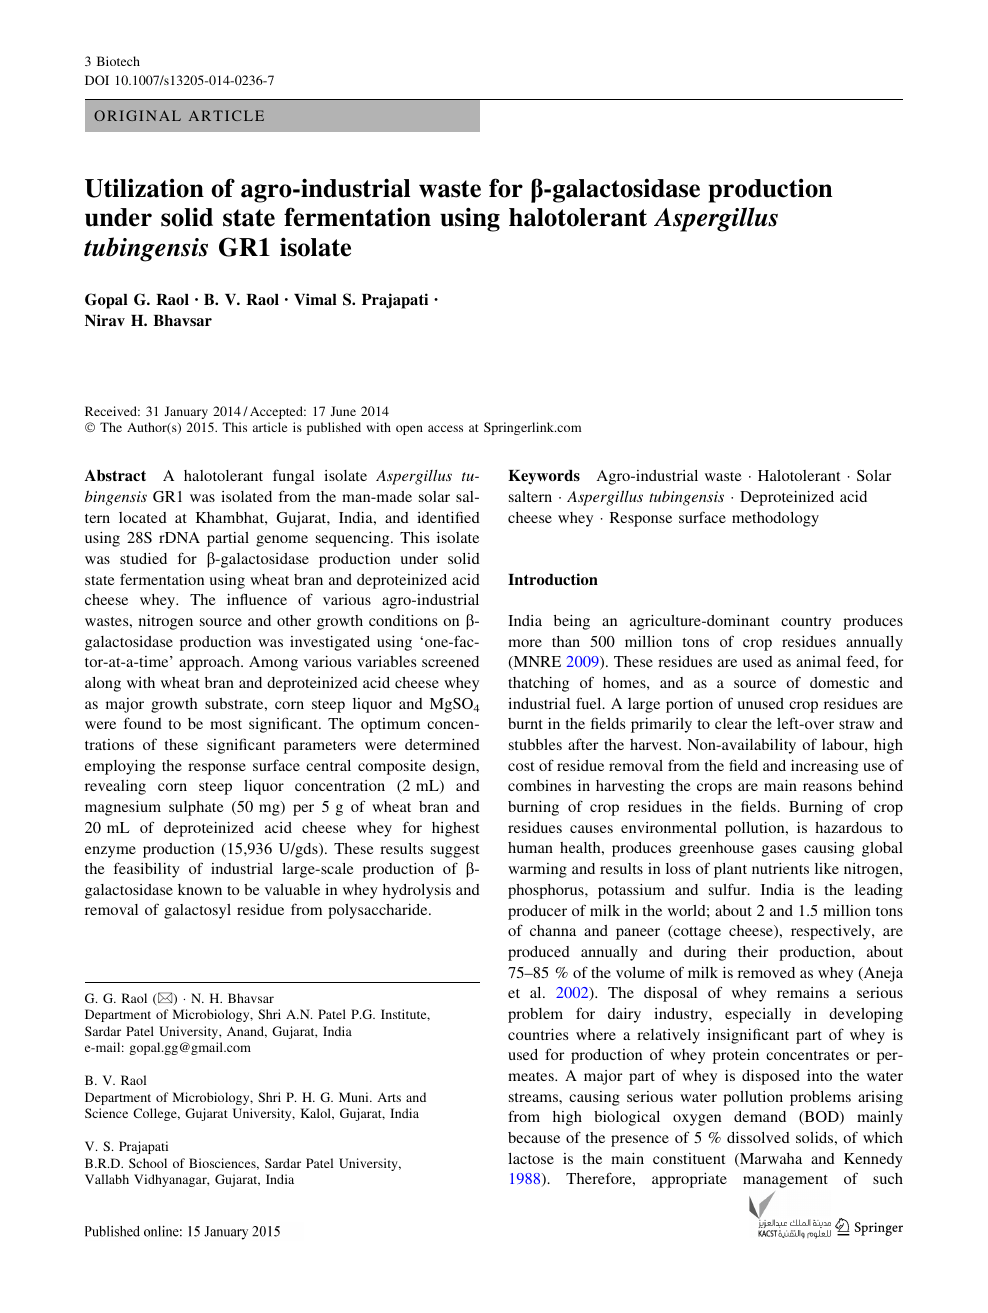 Utilization Of Agro Industrial Waste For B Galactosidase Production Under Solid State Fermentation Using Halotolerant Aspergillus Tubingensis Gr1 Isolate Topic Of Research Paper In Chemical Sciences Download Scholarly Article Pdf And Read For